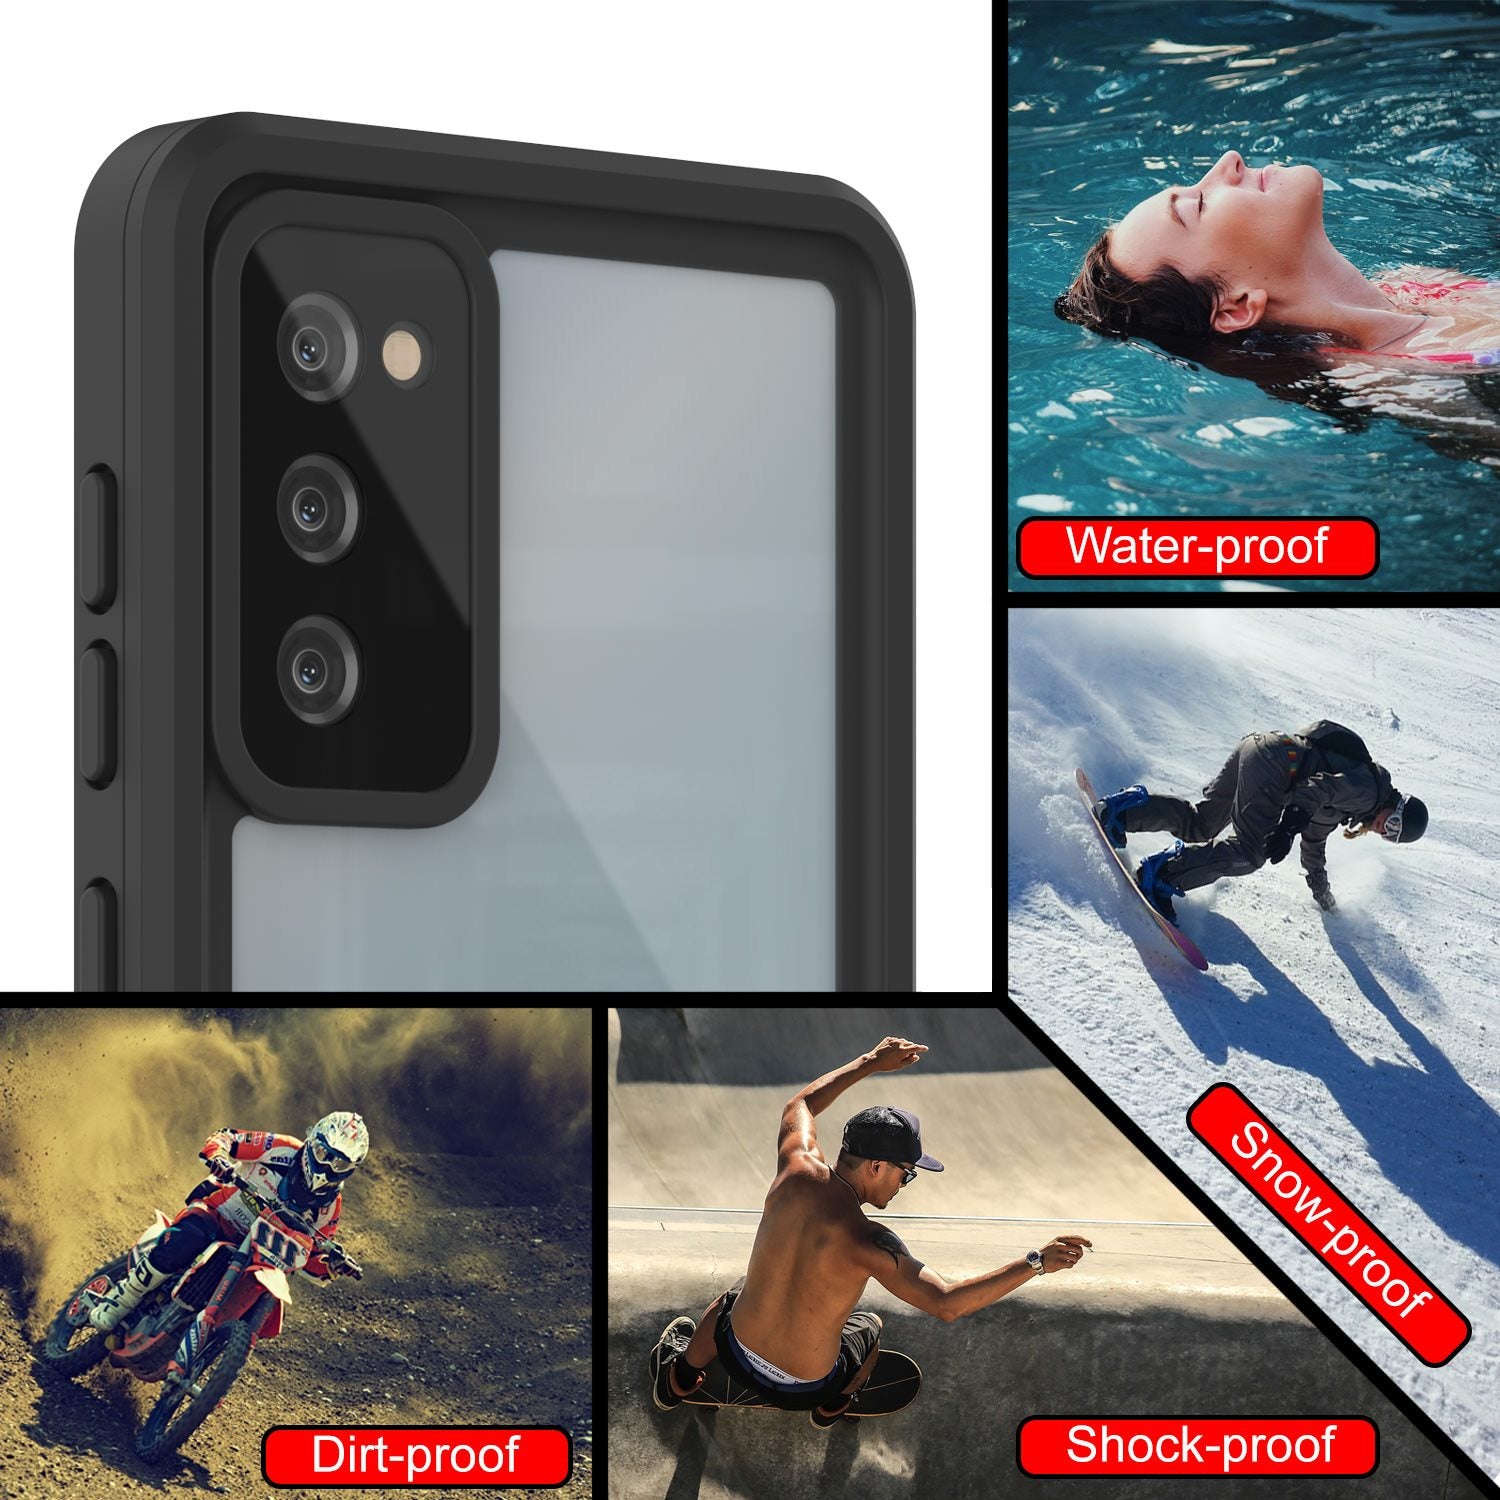 Galaxy S20 FE Water/Shockproof [Extreme Series] With Screen Protector Case [Black]